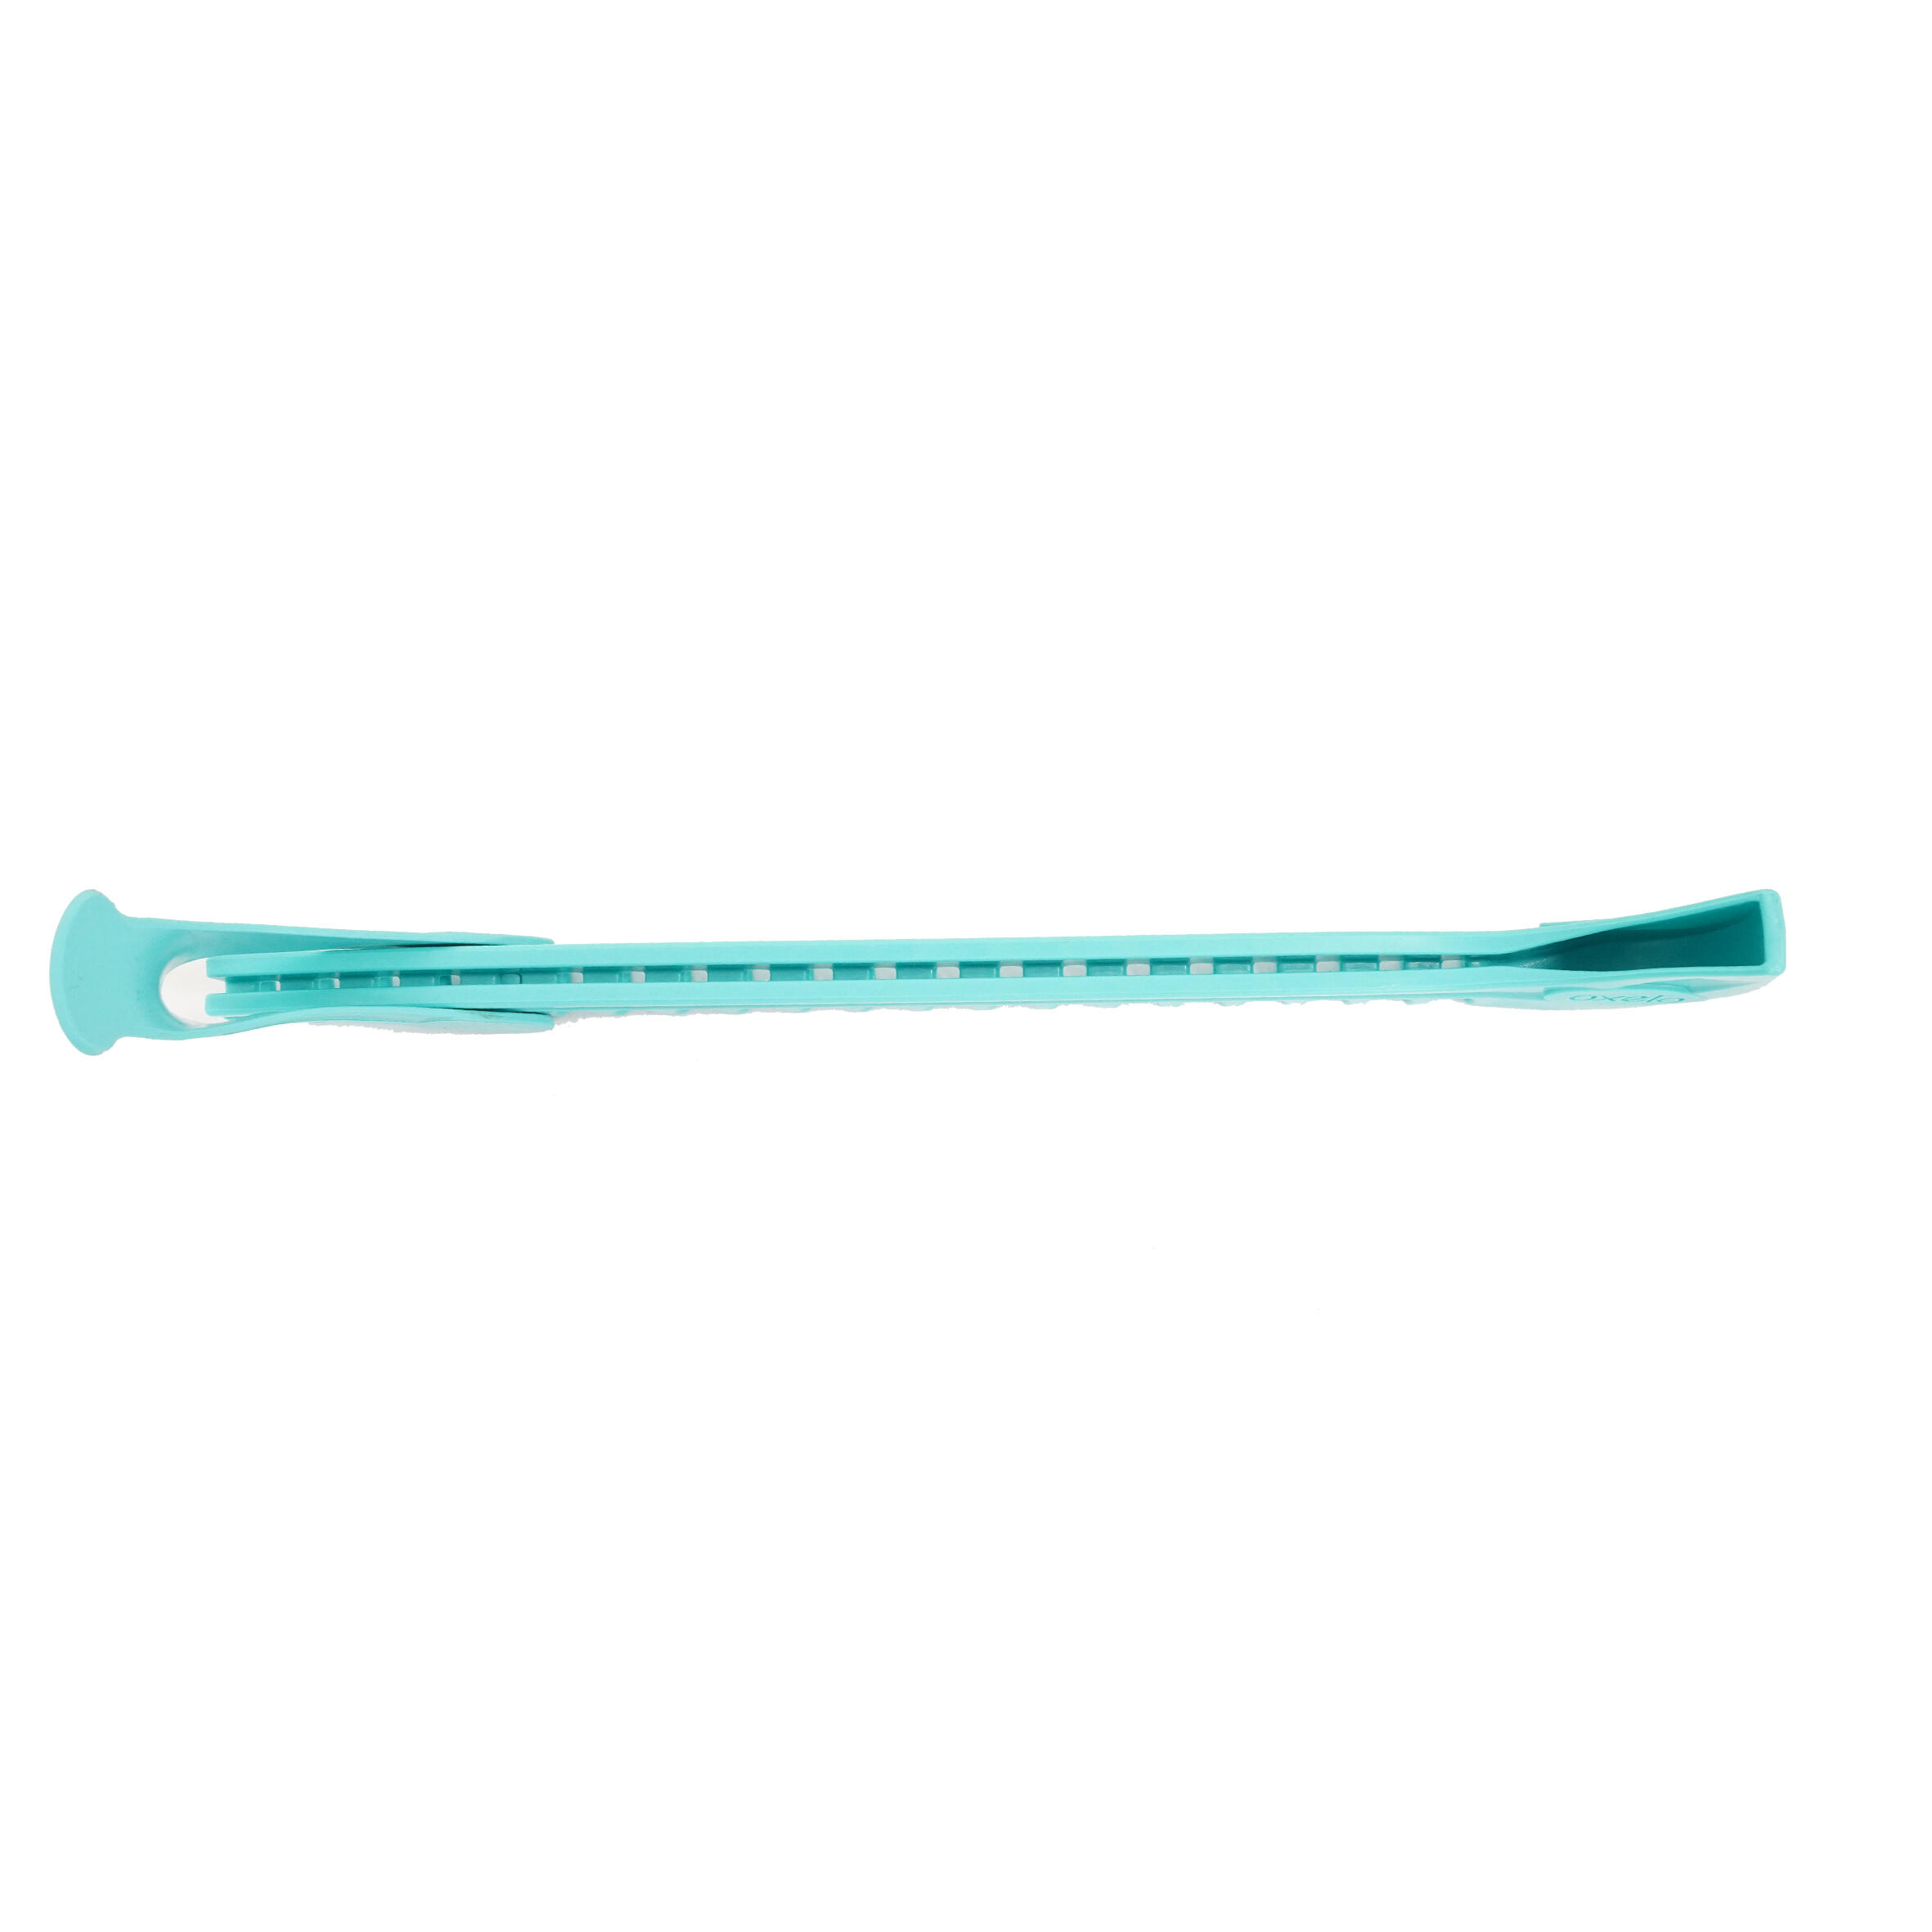 Basic Blade Cover - Turquoise 3/5